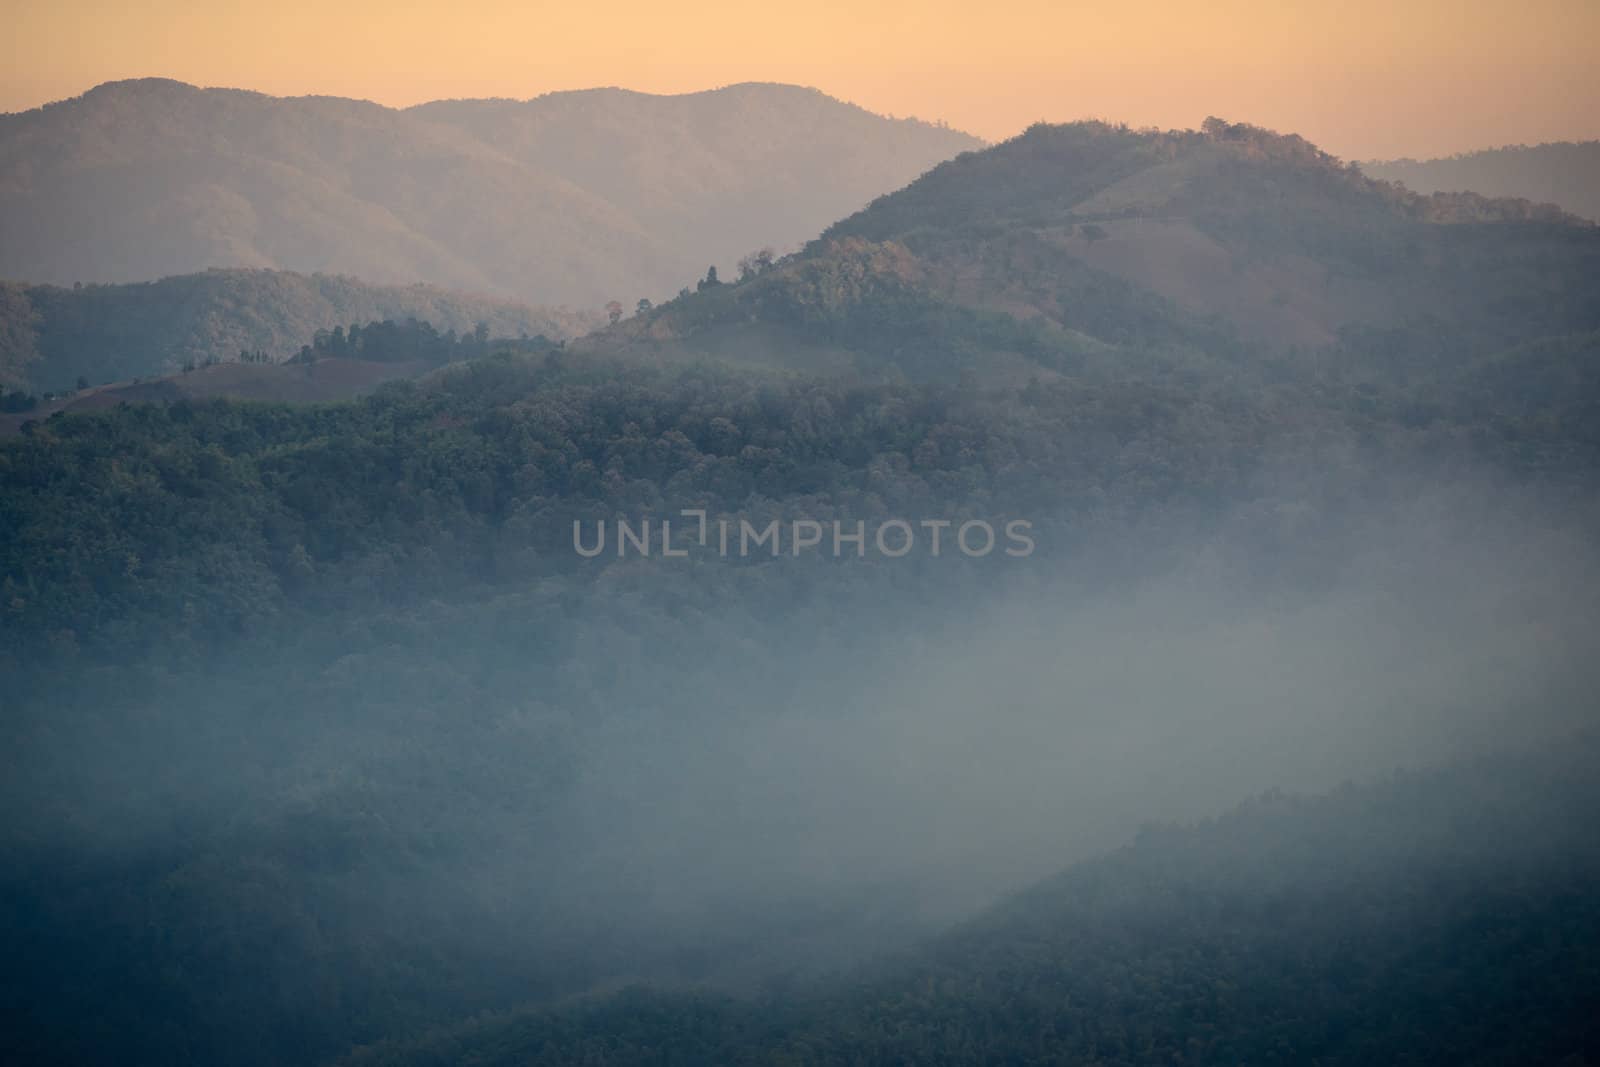 Mist in the mountains at sunset in northern Thailand